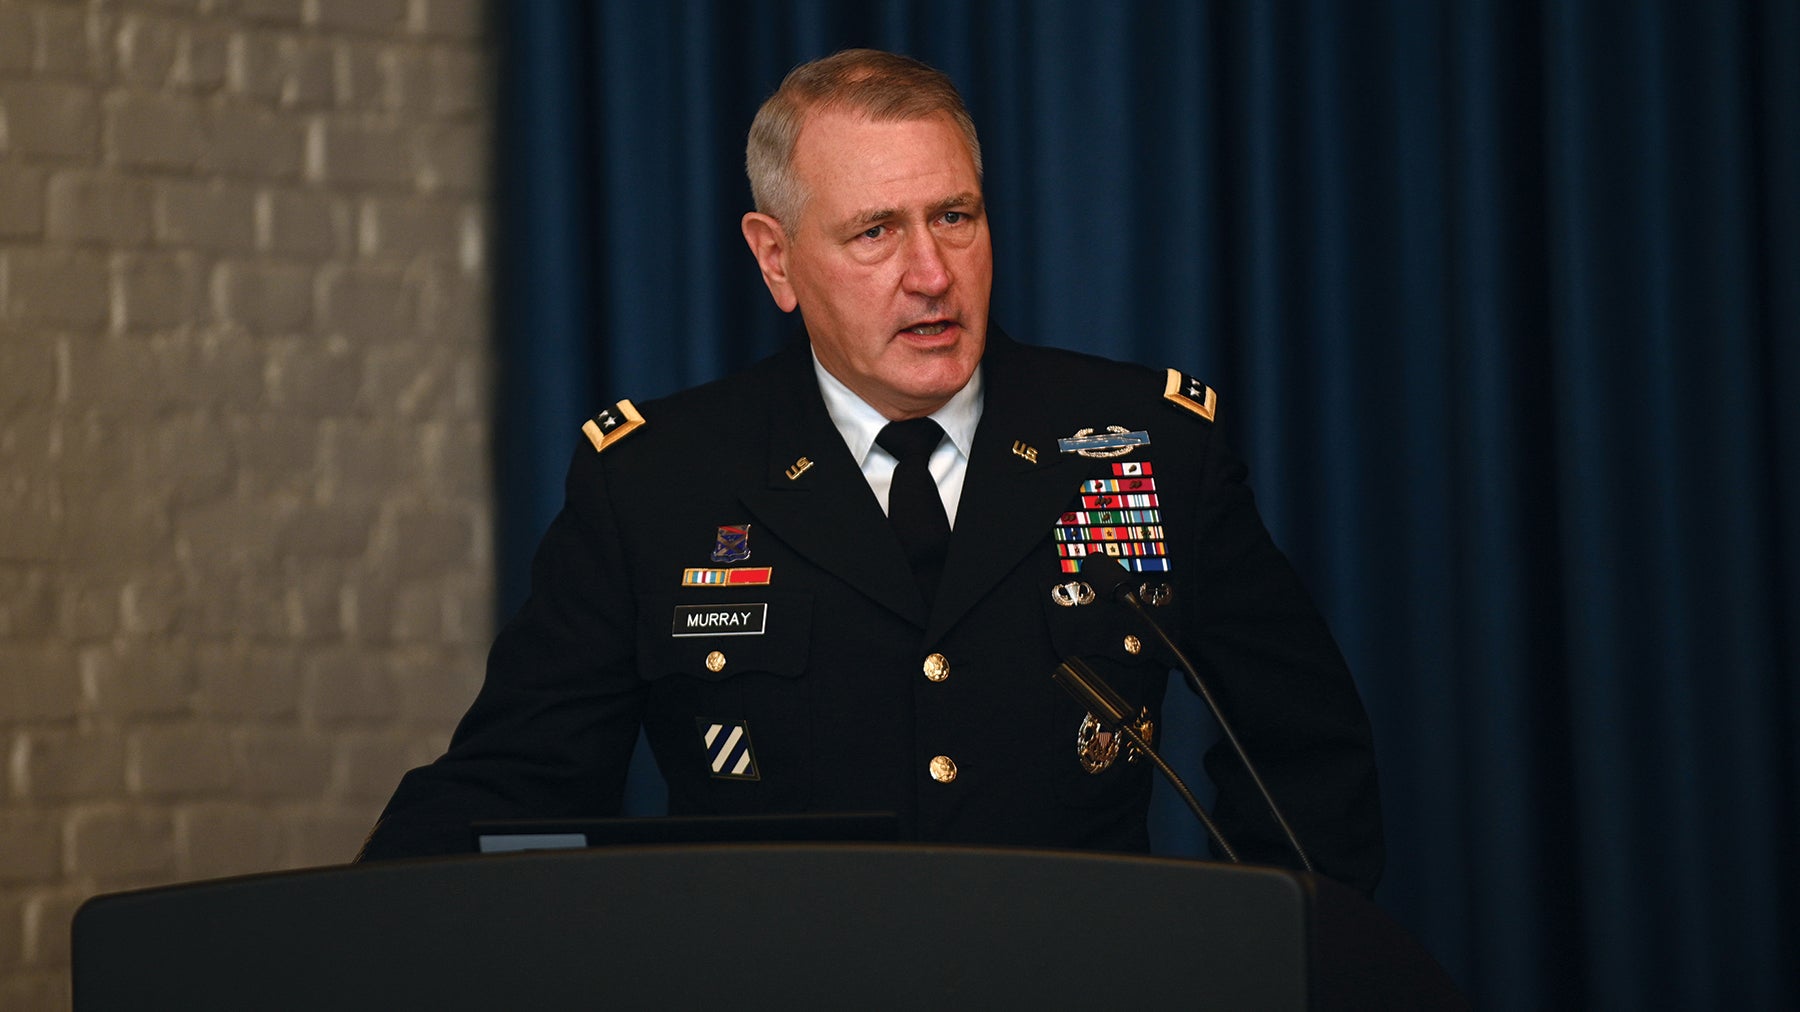 Gen. Mike Murray, commander of the U.S. Army Futures Command, speaks during a promotion ceremony at Camp Mabry, Texas, in November 2020. (Credit: U.S. Army/David Miller)